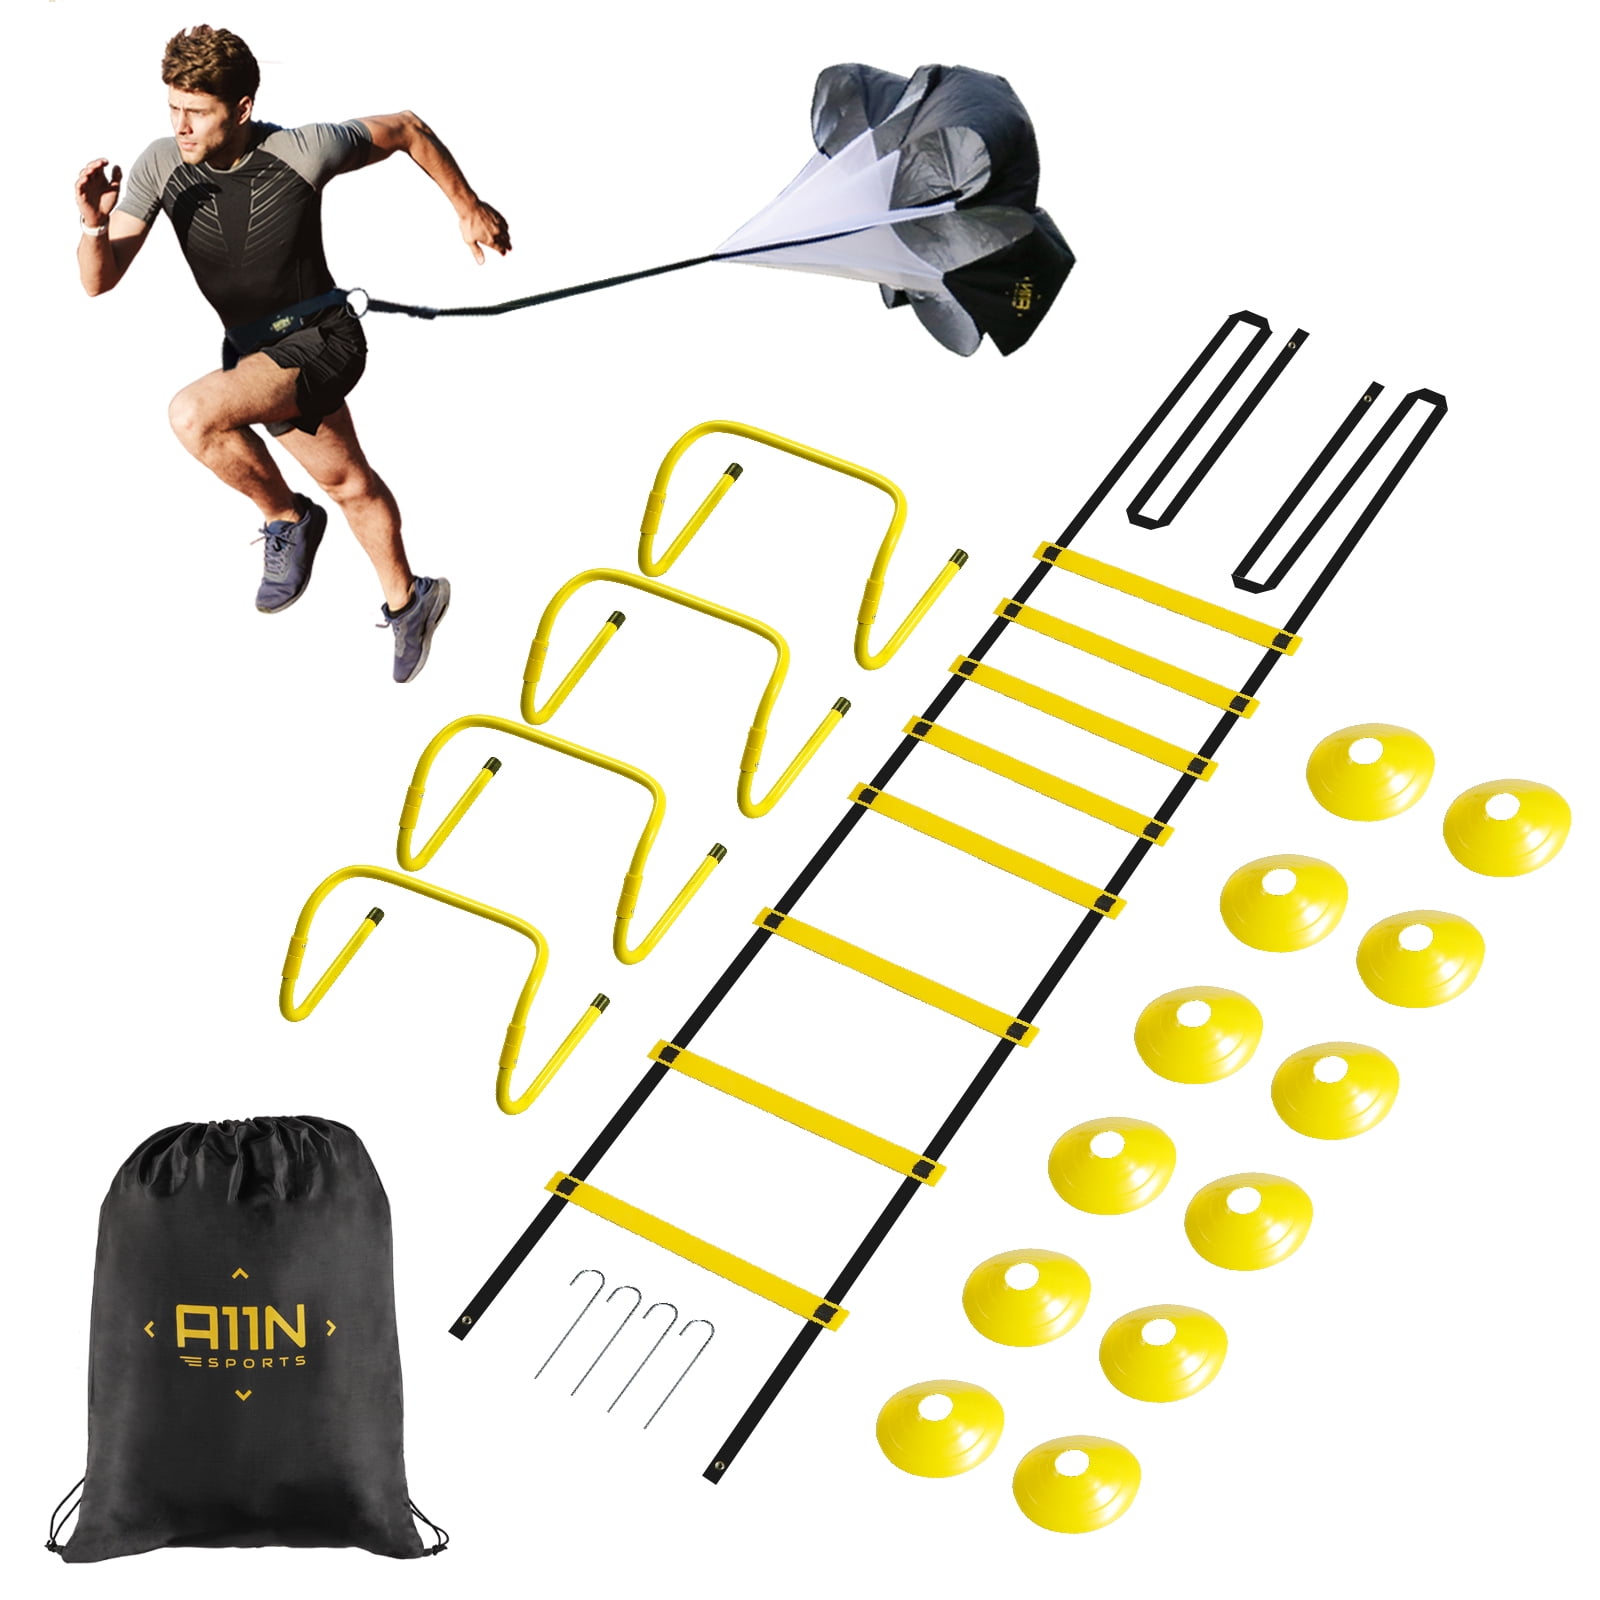 HS Speed Hurdles Training Equipment for Soccer Hockey and More Sports 6 Pack 